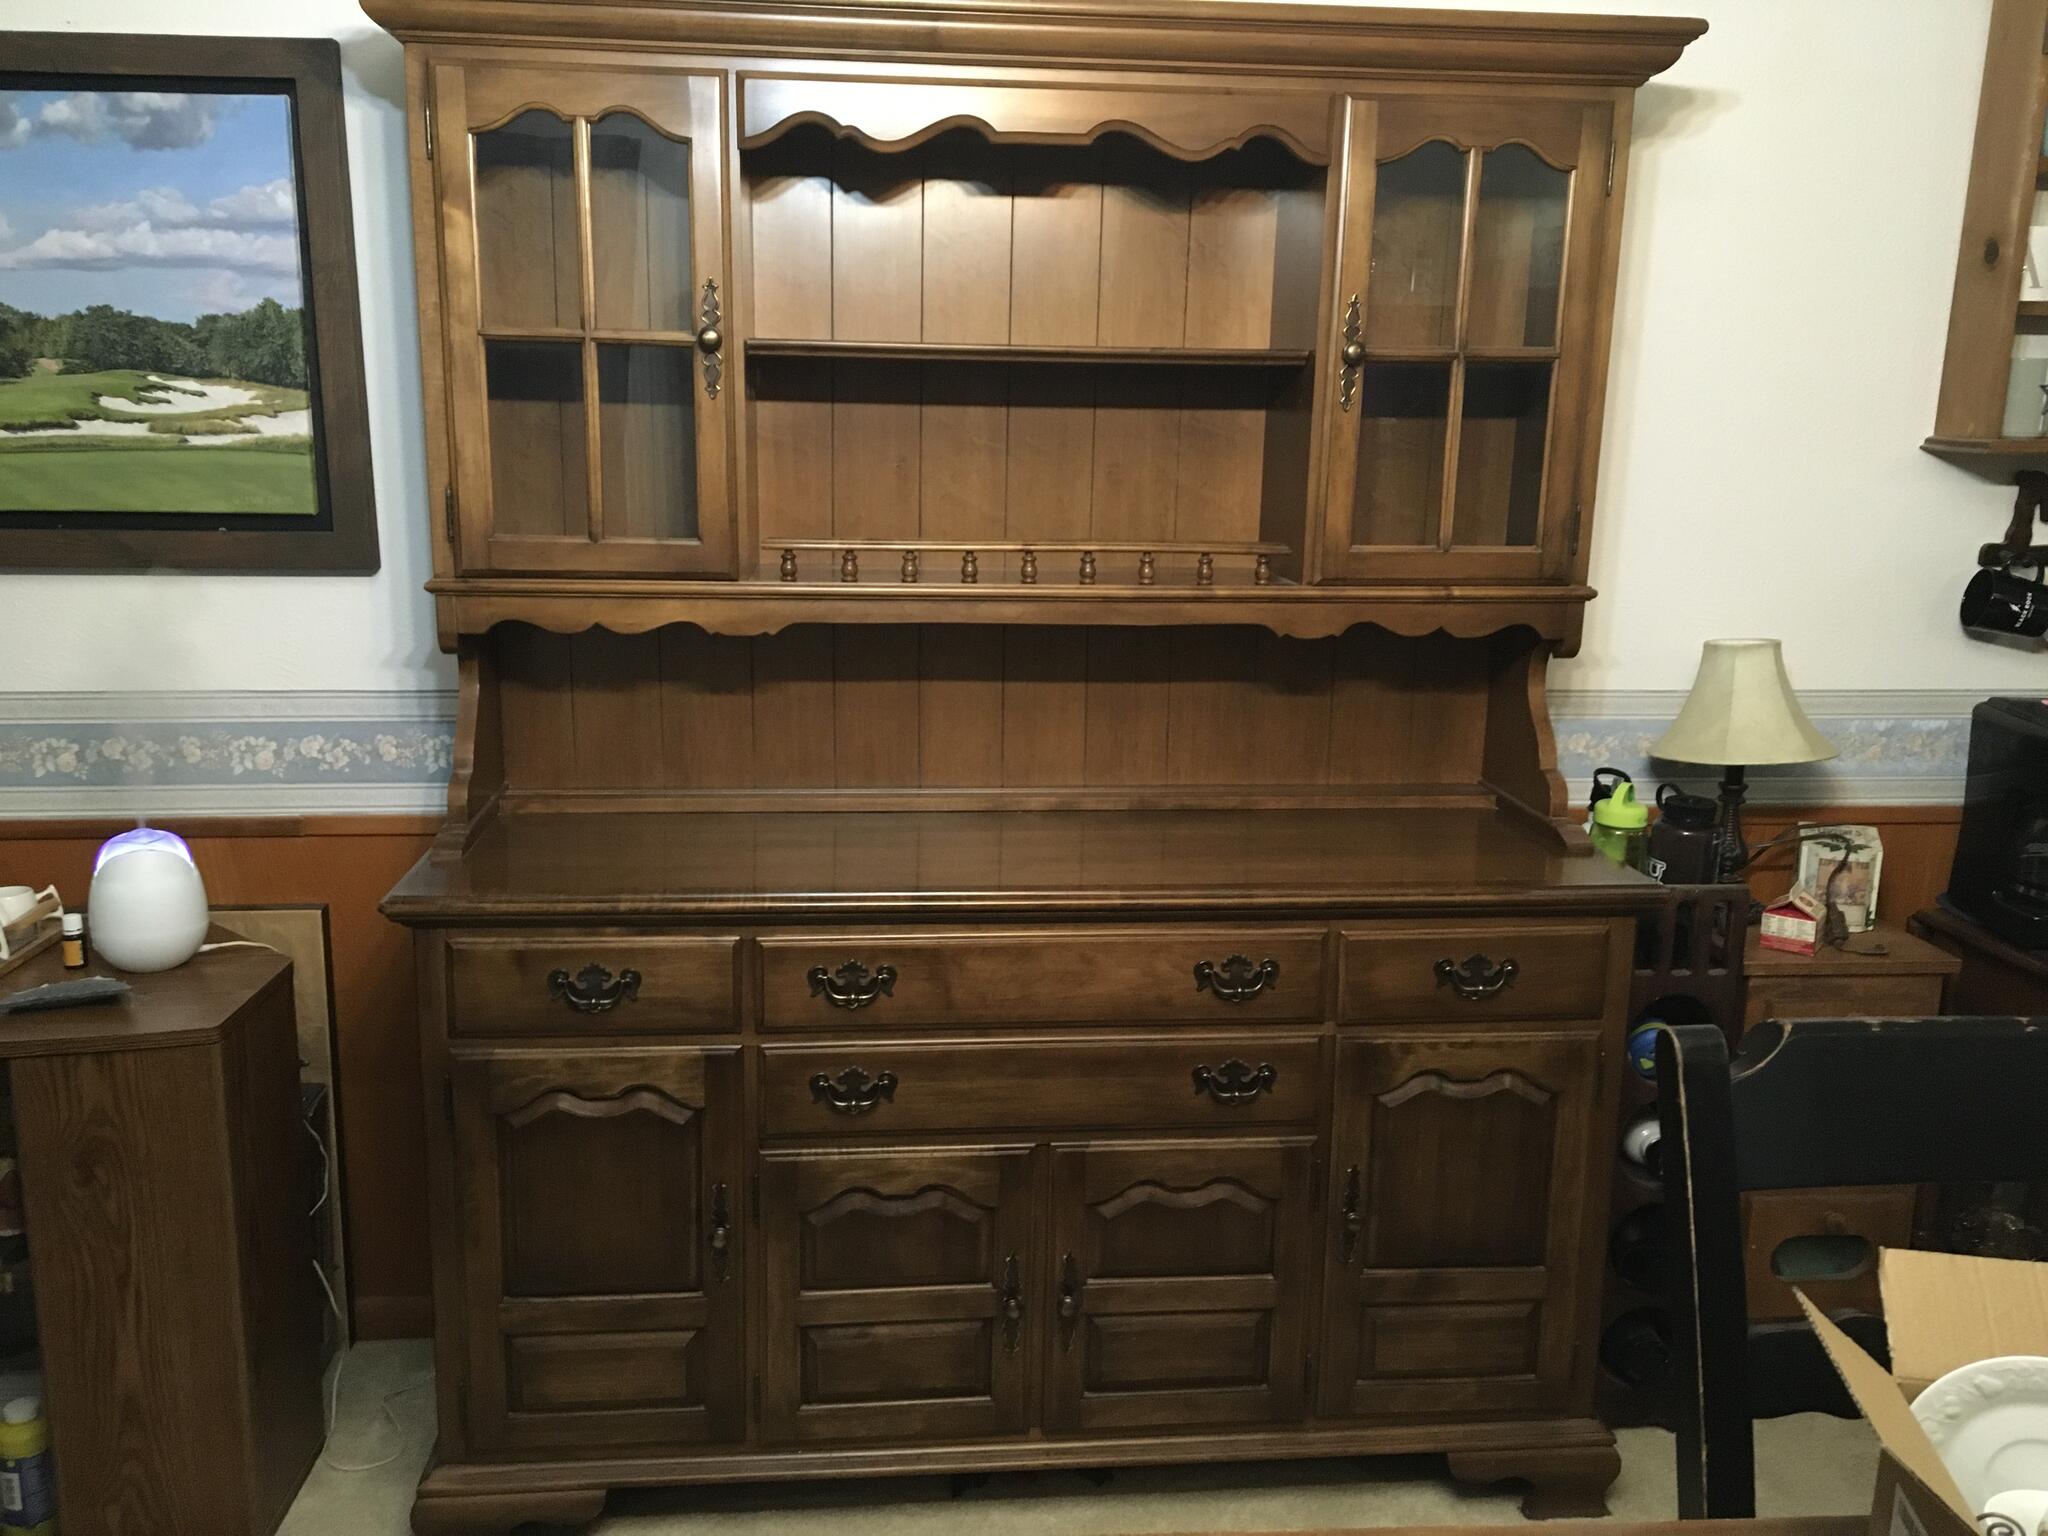 Vintage Maplewood Early American Hutch For $900 In Hurst, TX